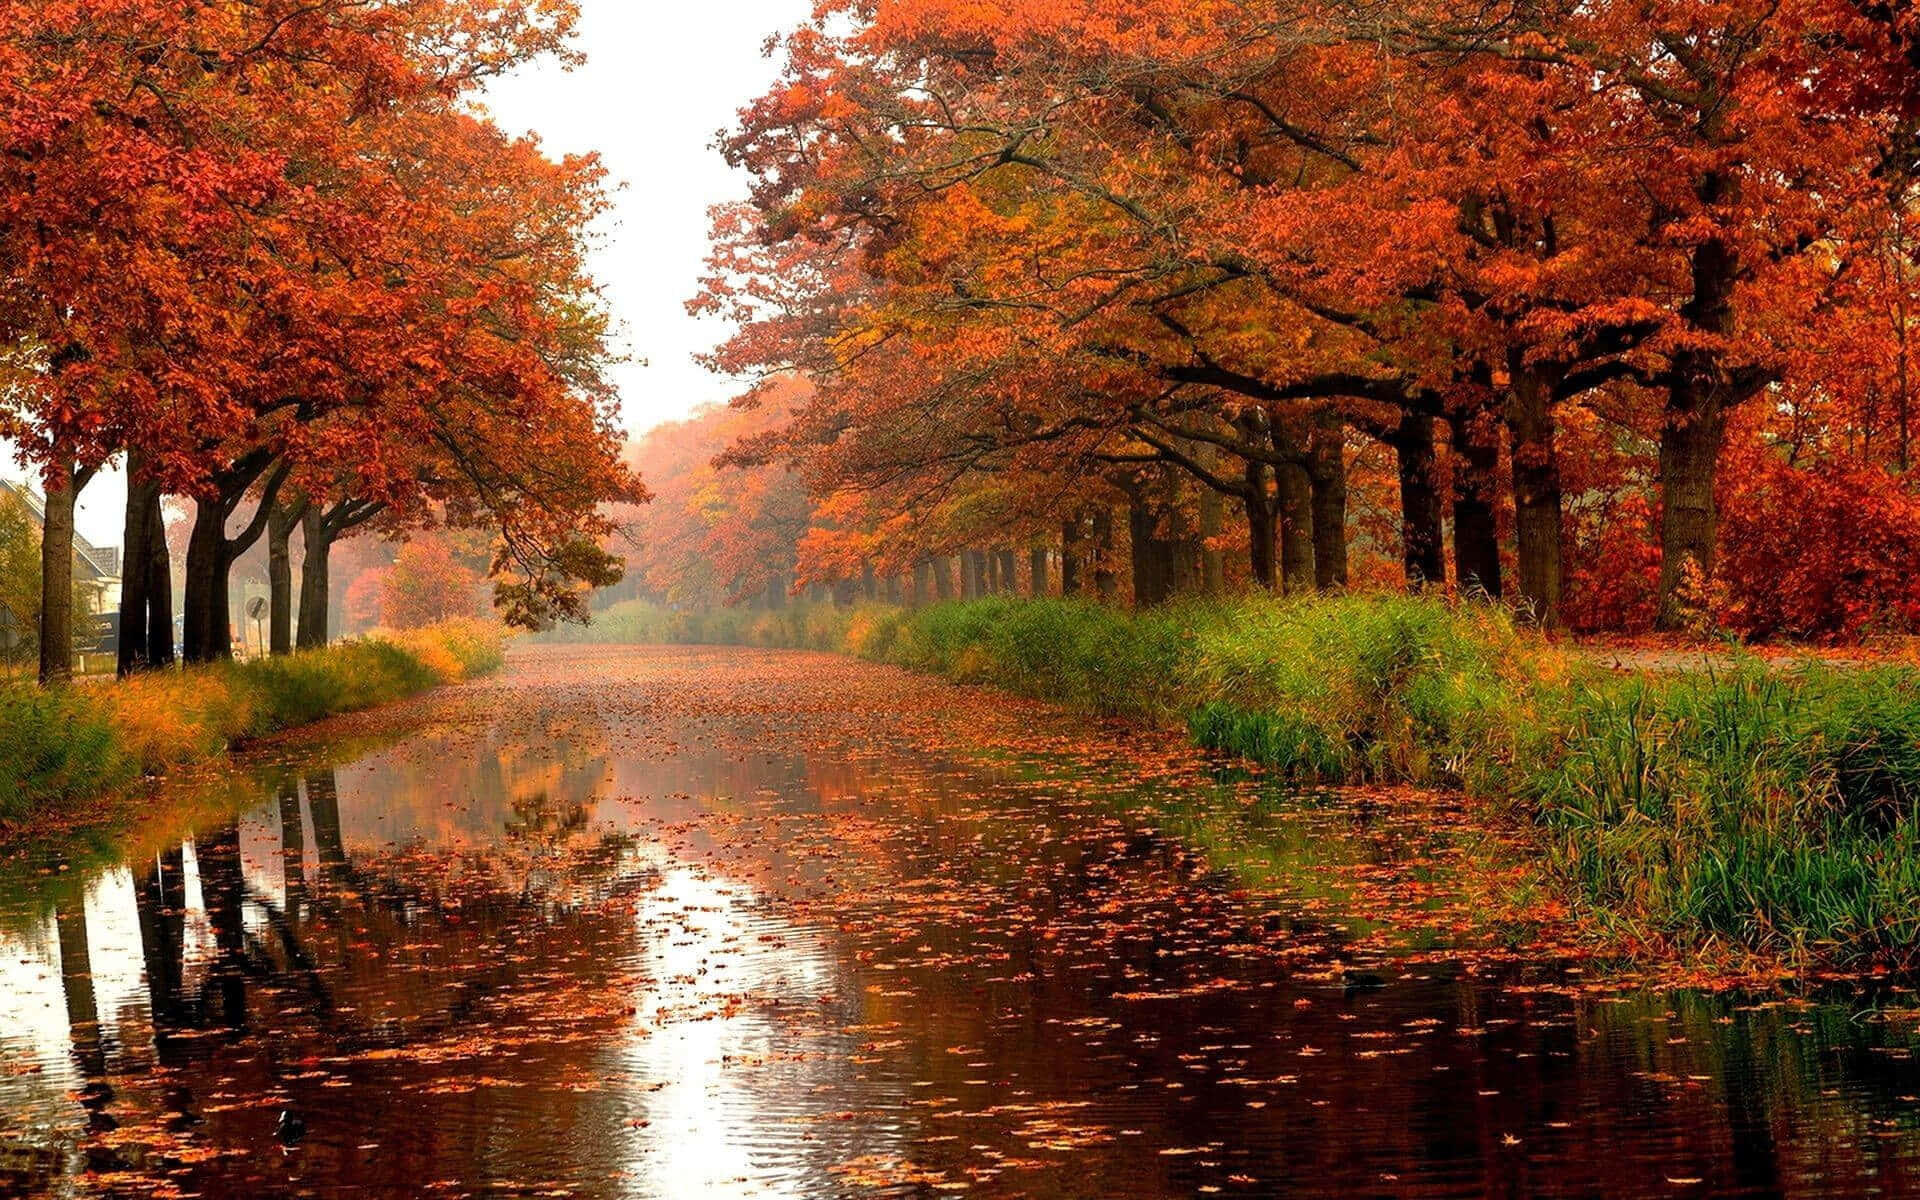 Take a tranquil stroll through nature's beauty and the glow of autumn